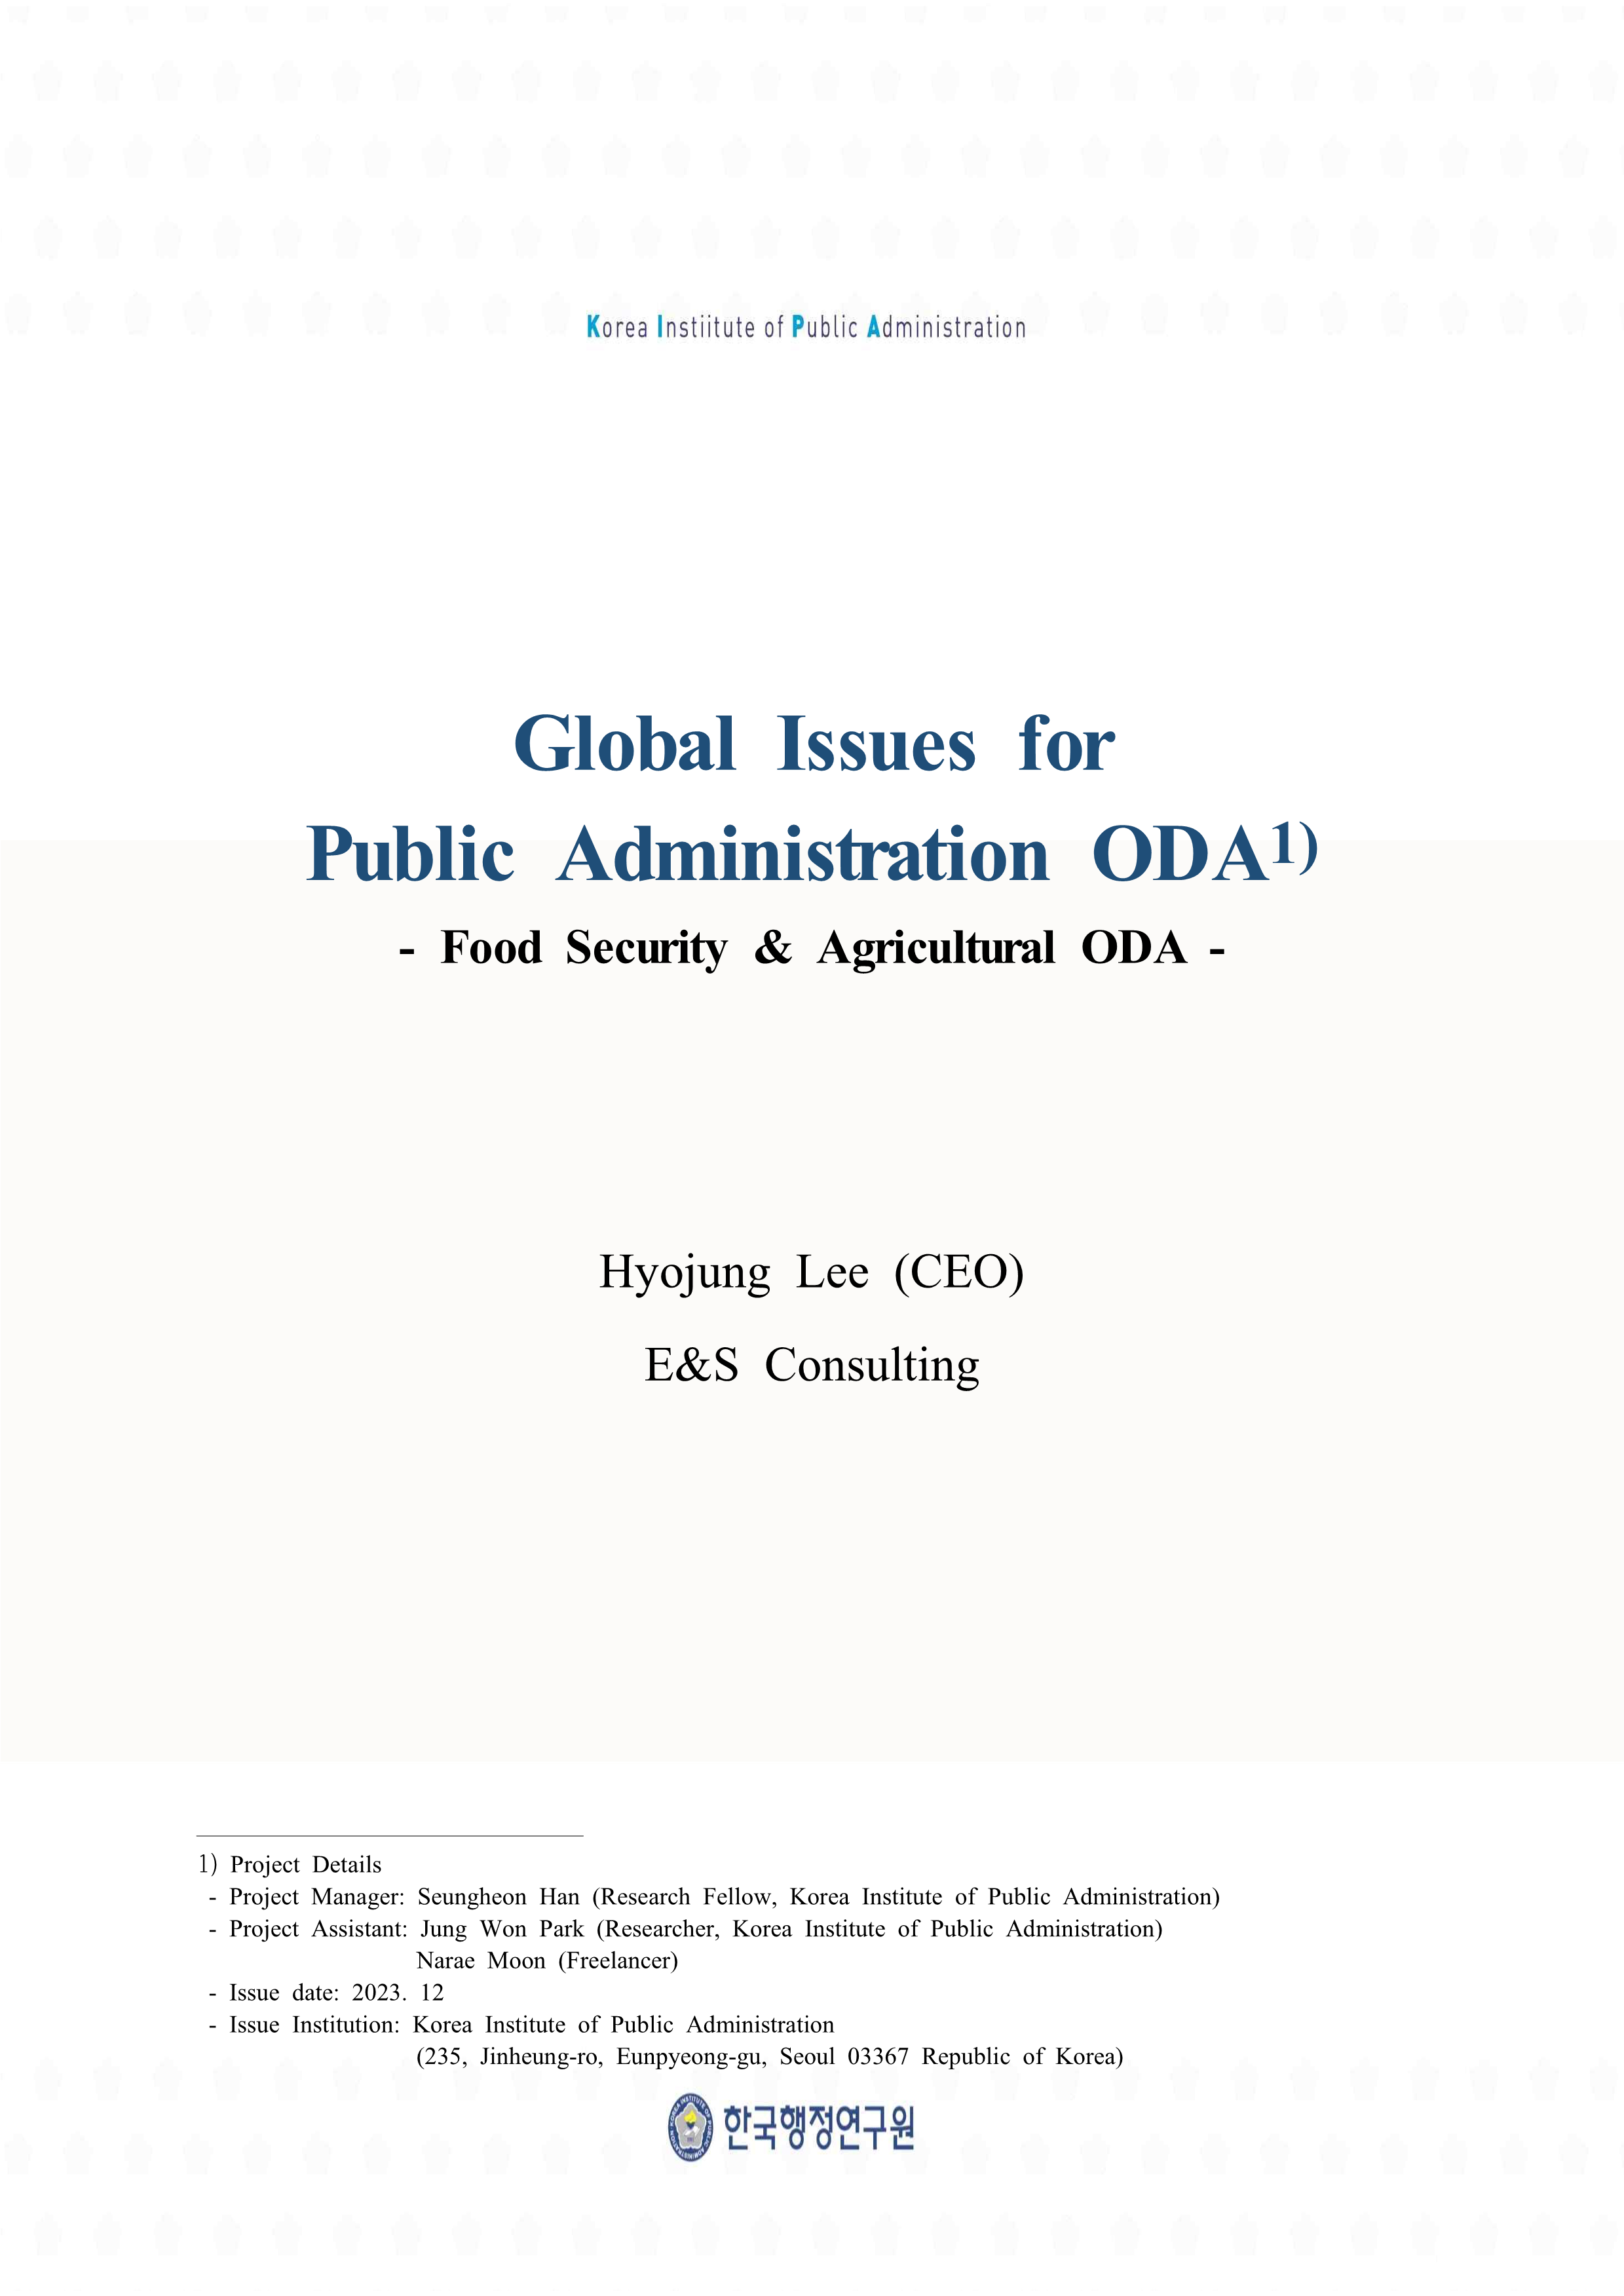 《Global Issues for Public Administration ODA_3-5》 Food Security & Agricultural ODA